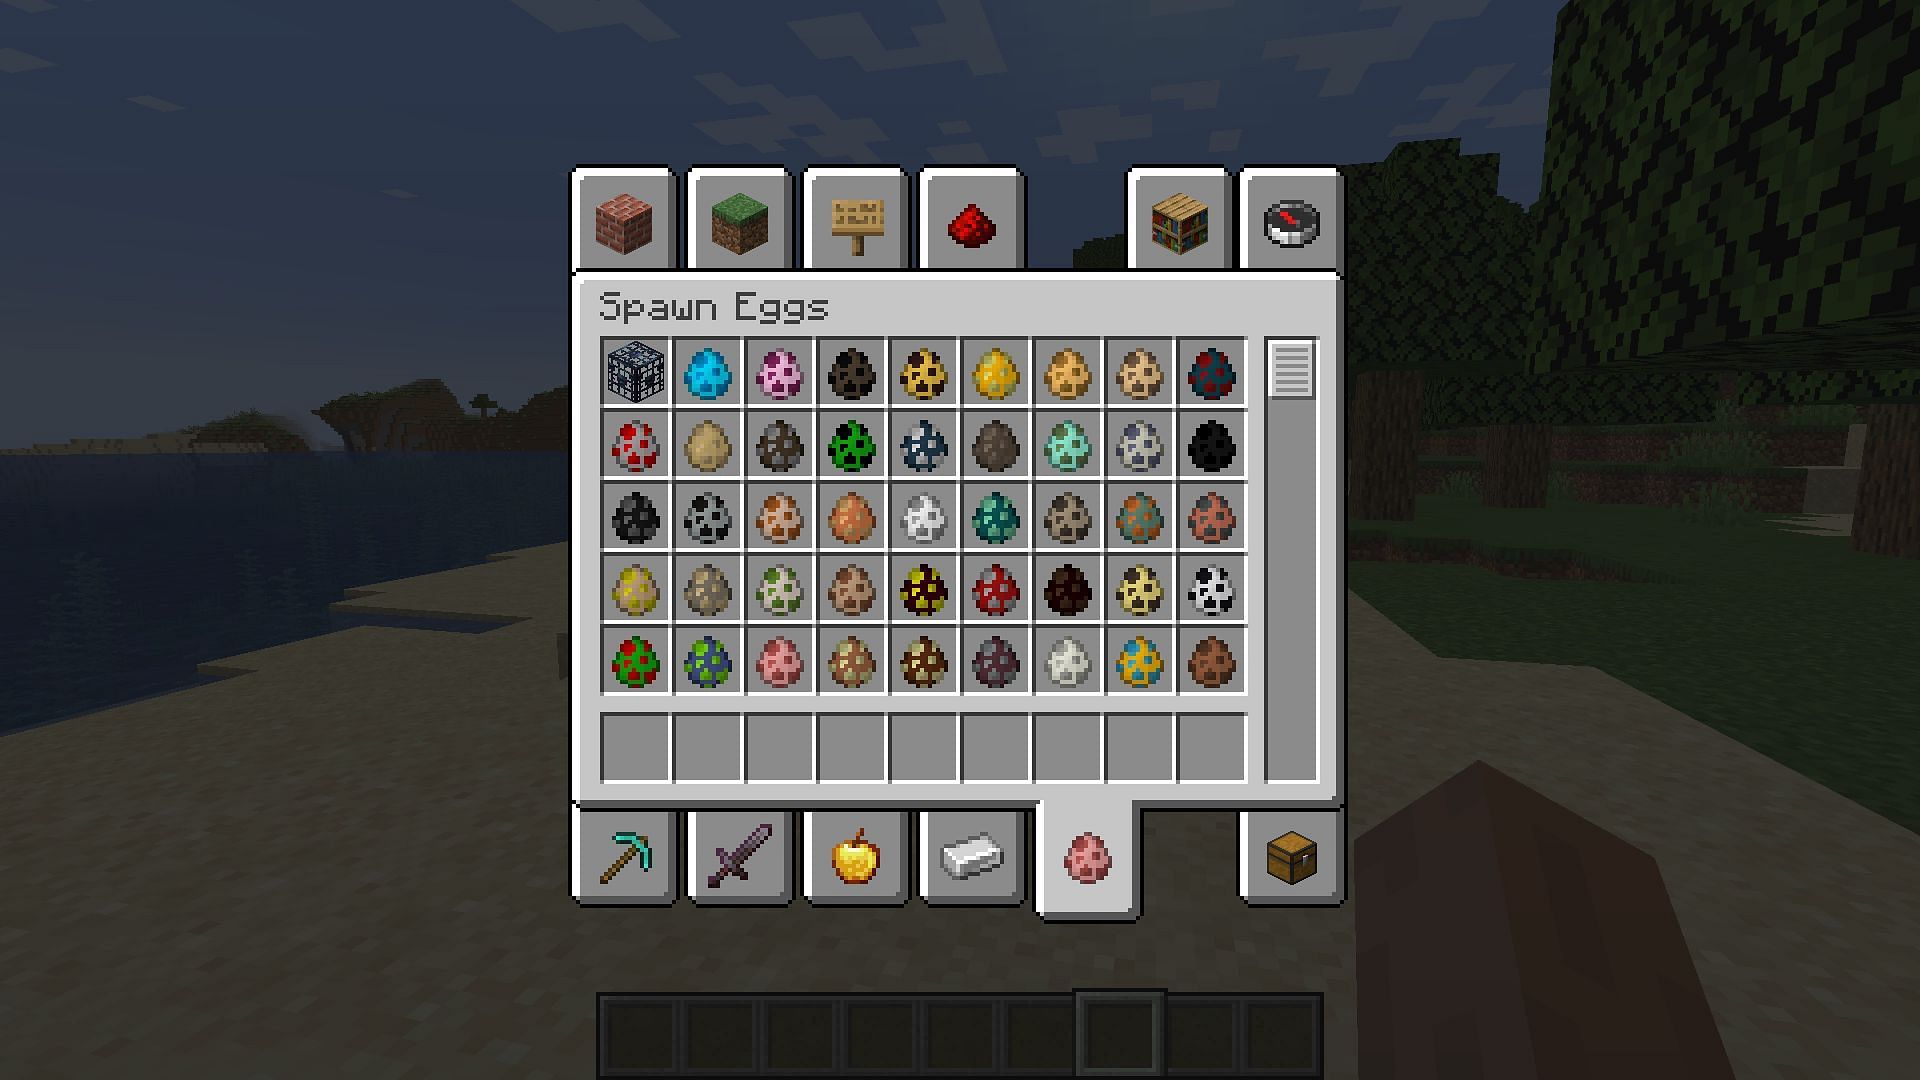 Snapshot 22w44a adds new spawn eggs